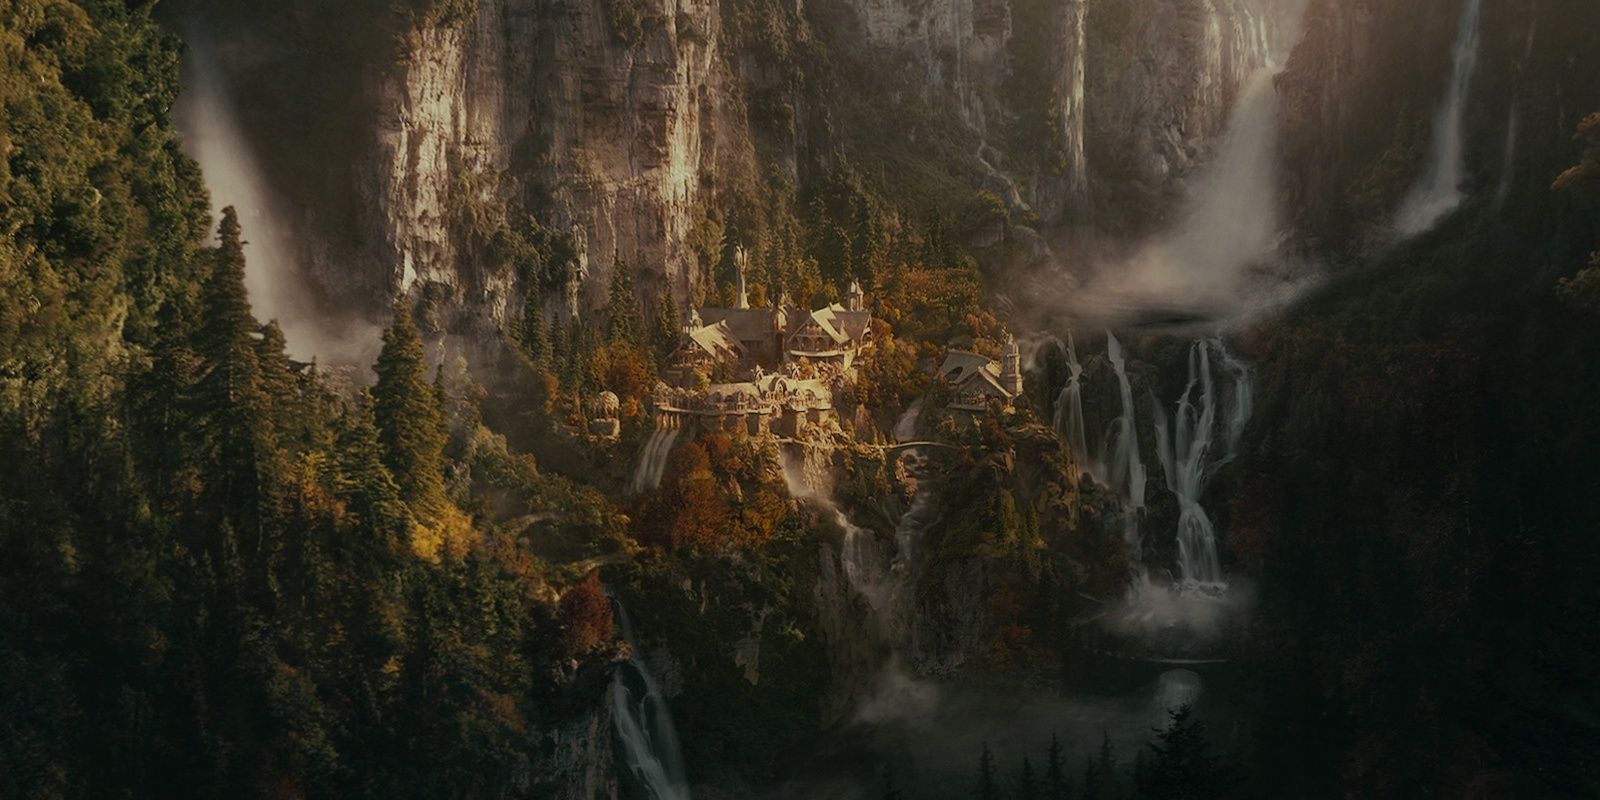 Rivendell from The Lord of the Rings